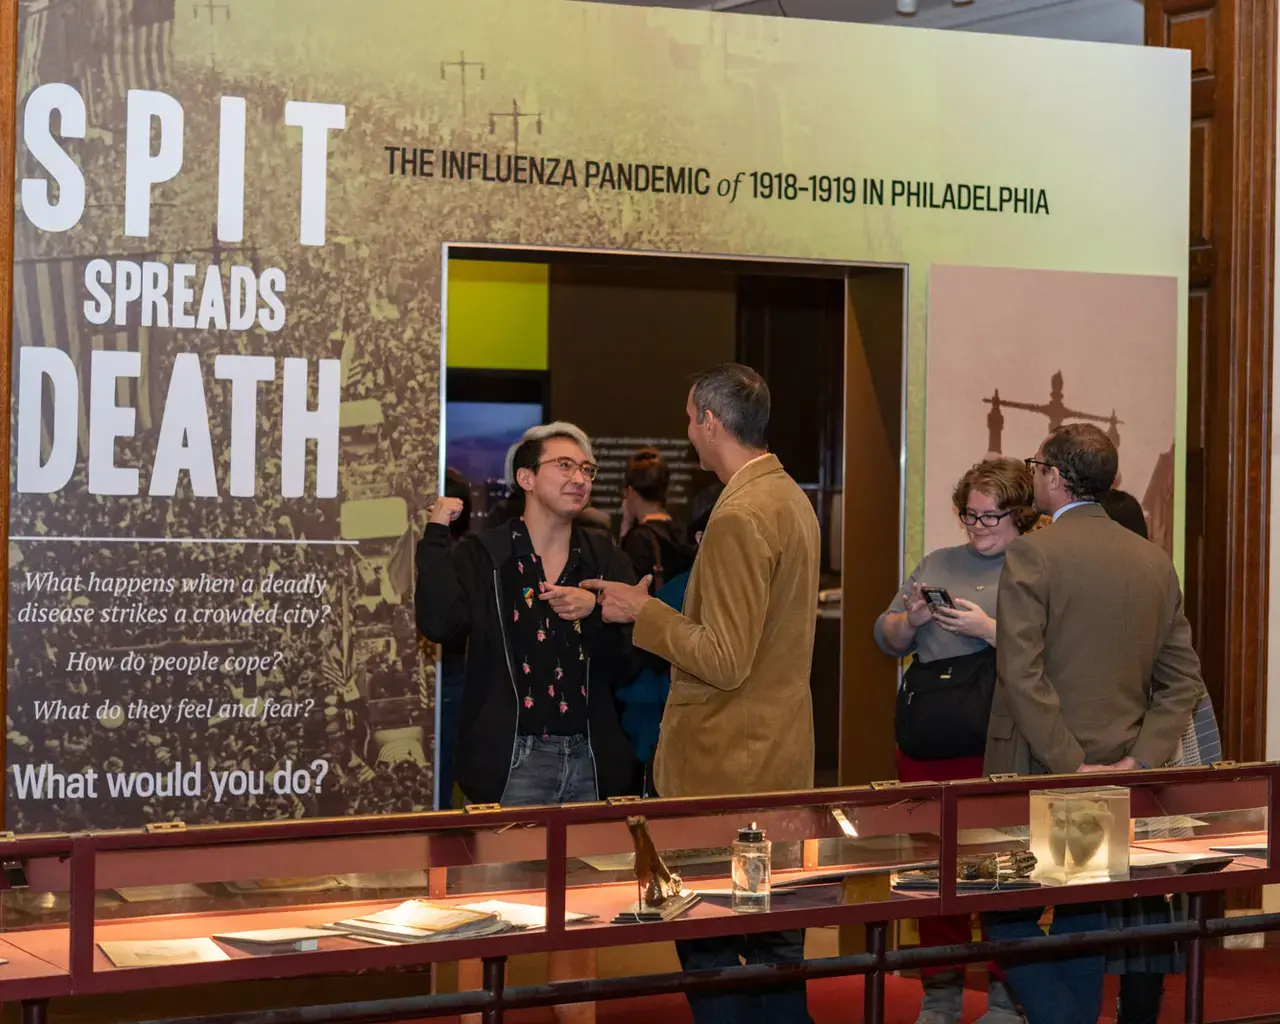 Spit Spreads Death: The Influenza Pandemic of 1918-19 in Philadelphia, 2019, the Mütter Museum. Photo by Constance Mensh, courtesy of the Mütter Museum of The College of Physicians of Philadelphia.